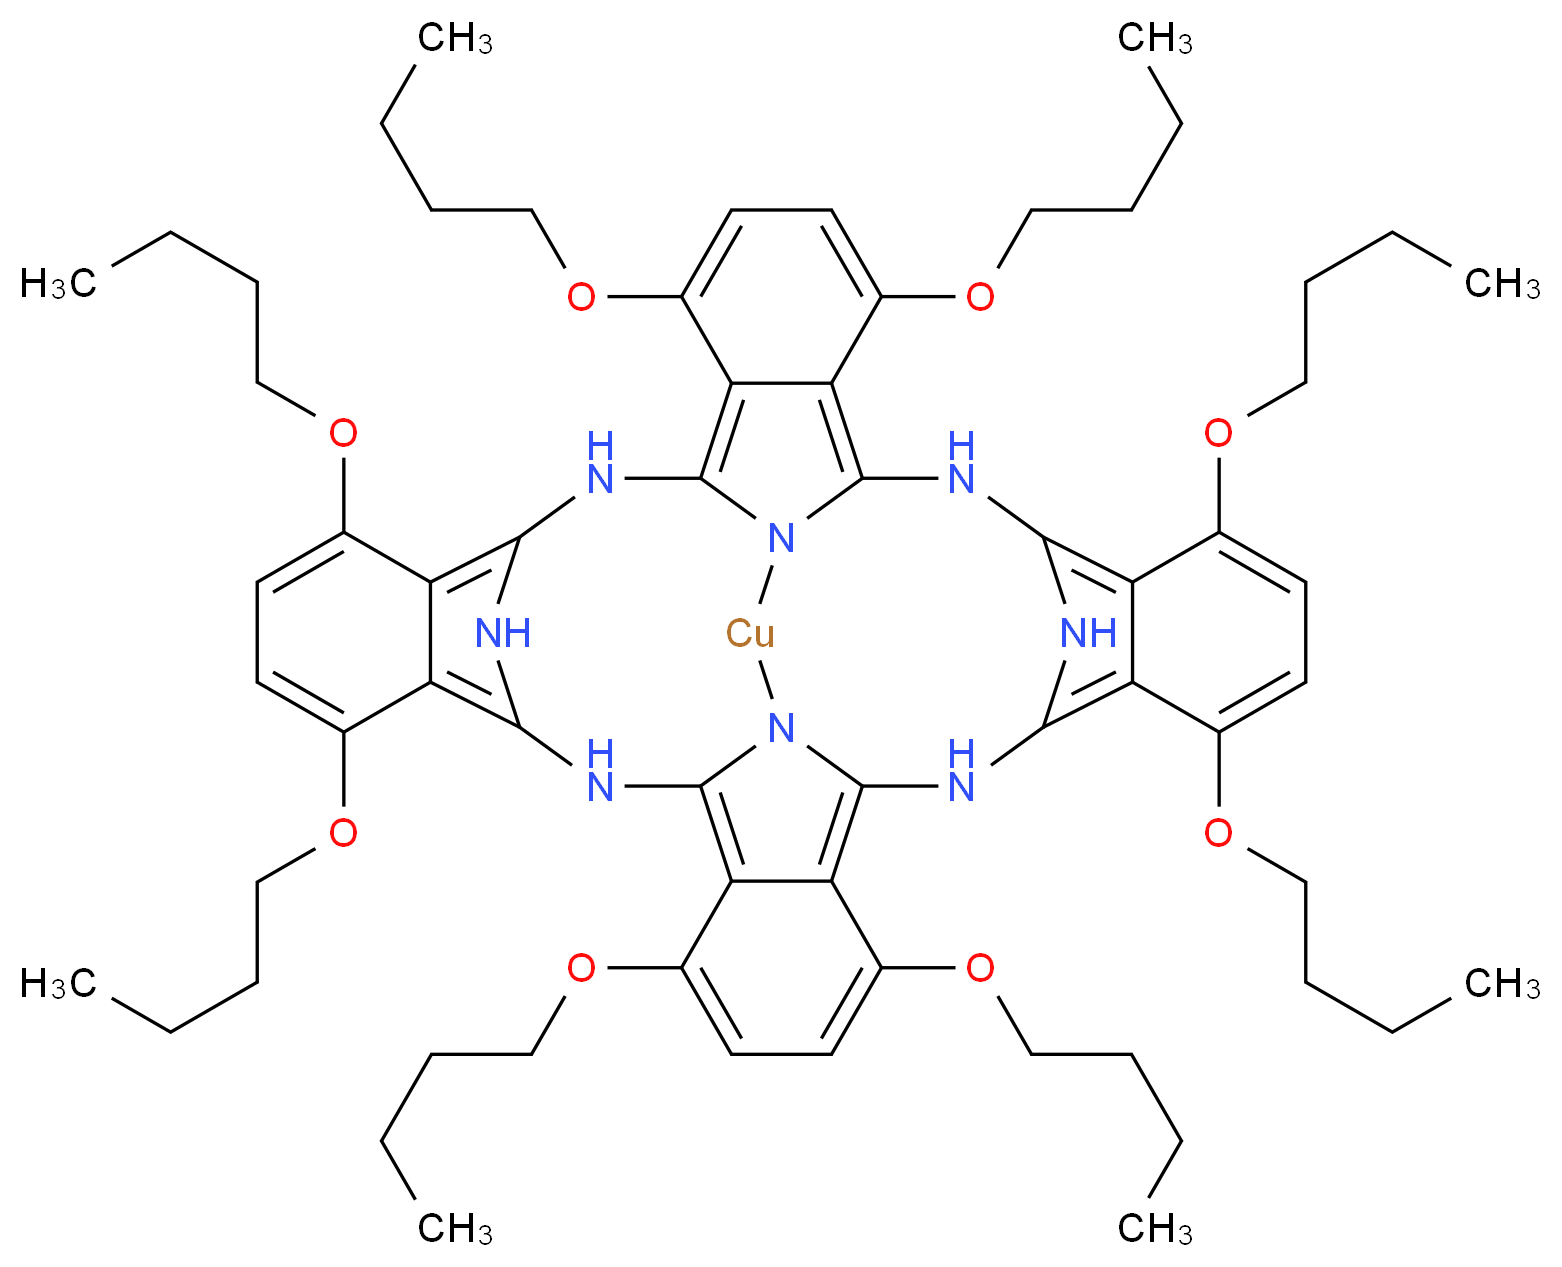 Copper(II) 1,4,8,11,15,18,22,25-octabutoxy-29H,31H-phthalocyanine_Molecular_structure_CAS_107227-88-3)